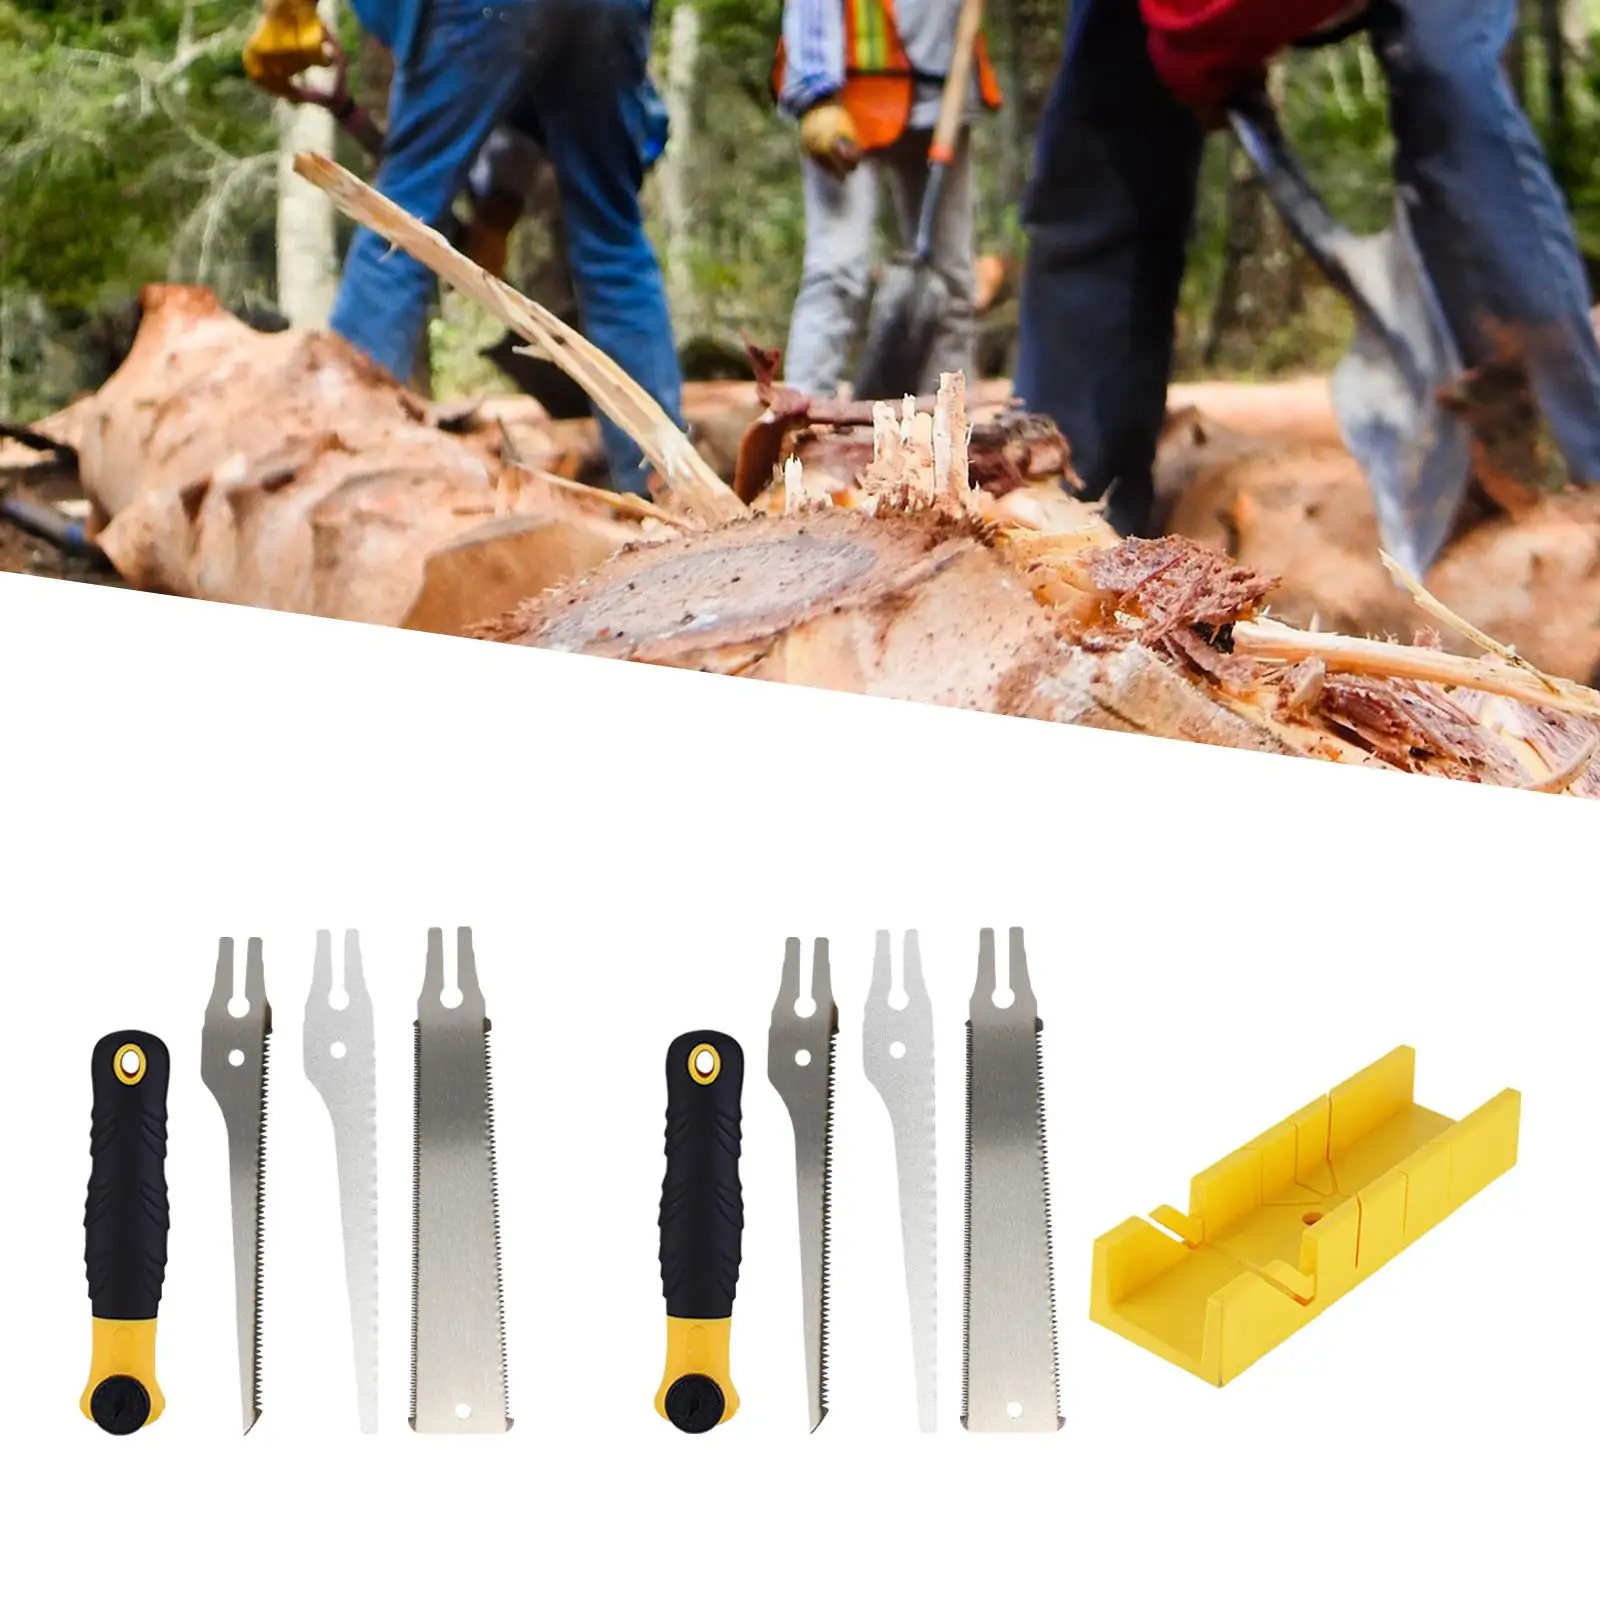 Garden Woodworking Saw Multifunctional Hand Tool Comfortable Handle Portable for Home Trimming Branches Outdoor Gardening DIY